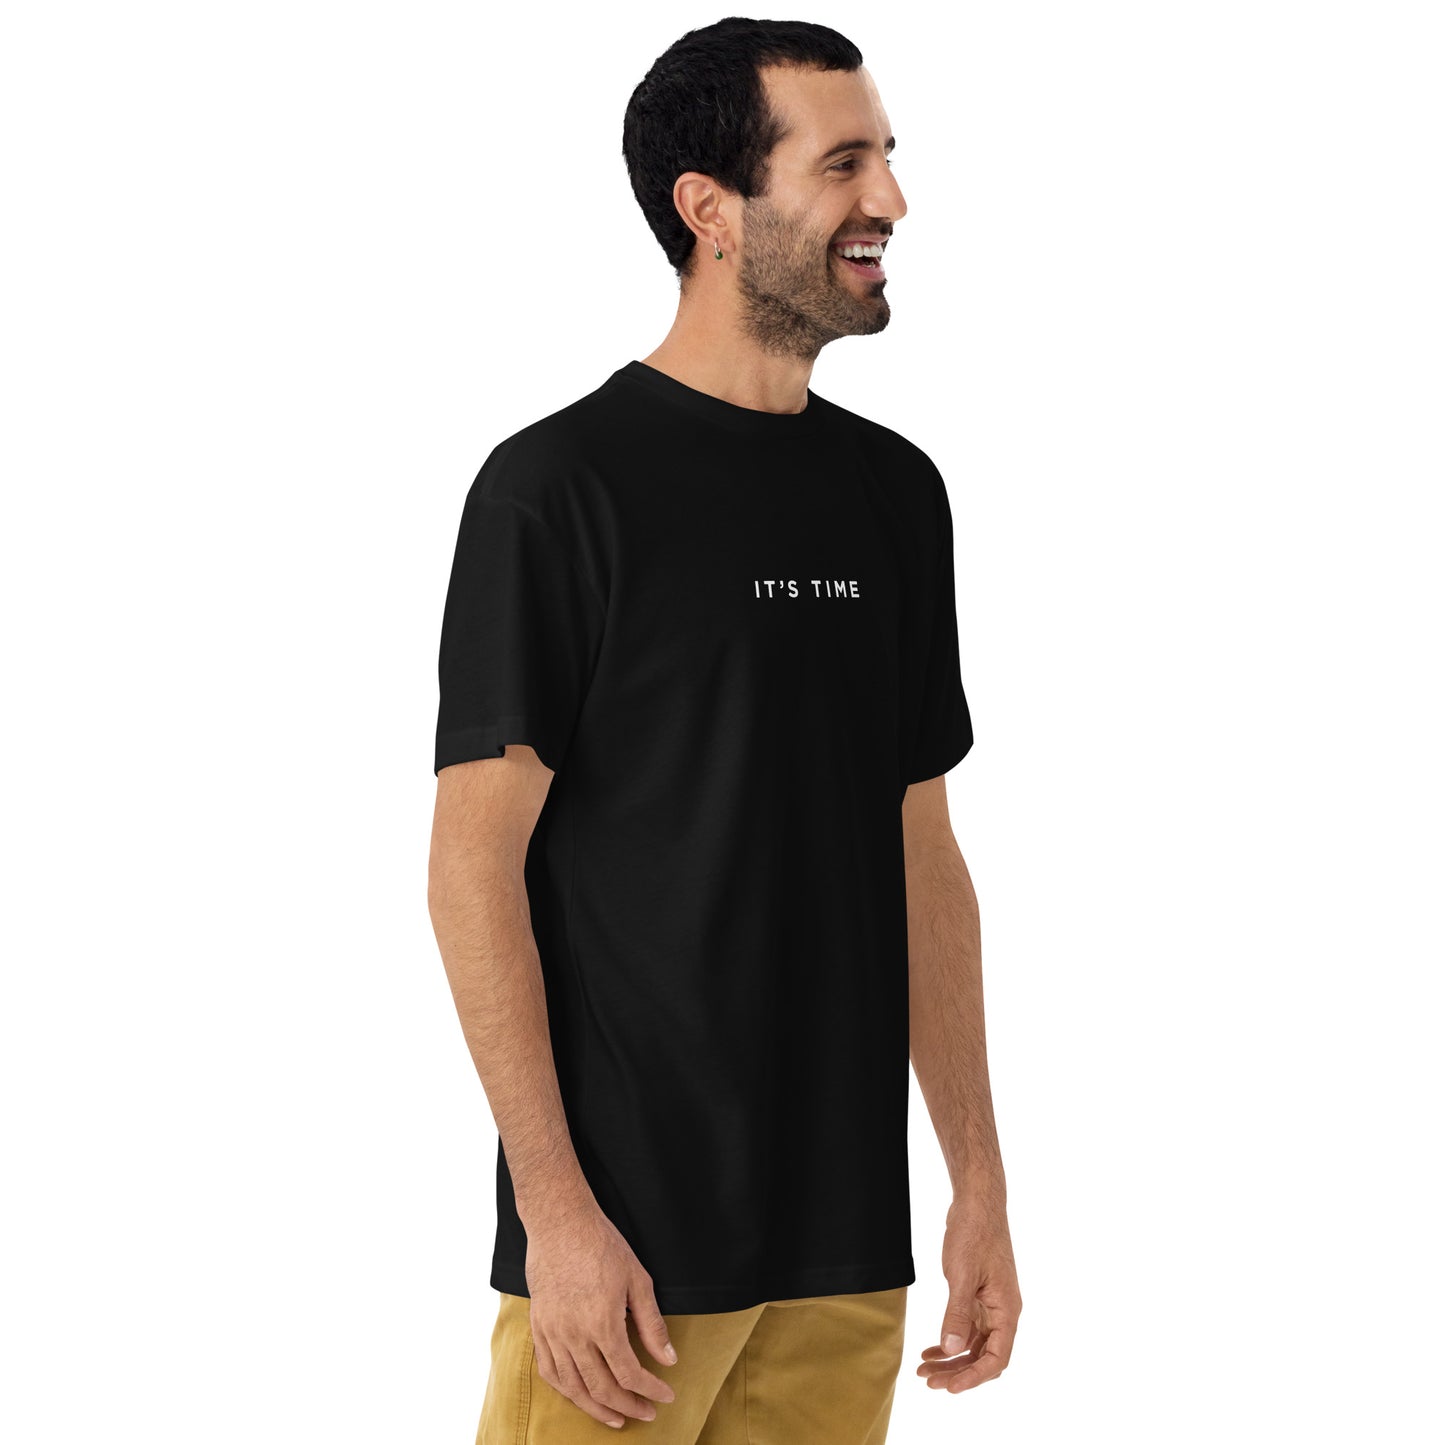 It's Time Men's Eco-Friendly Sustainable T-Shirt